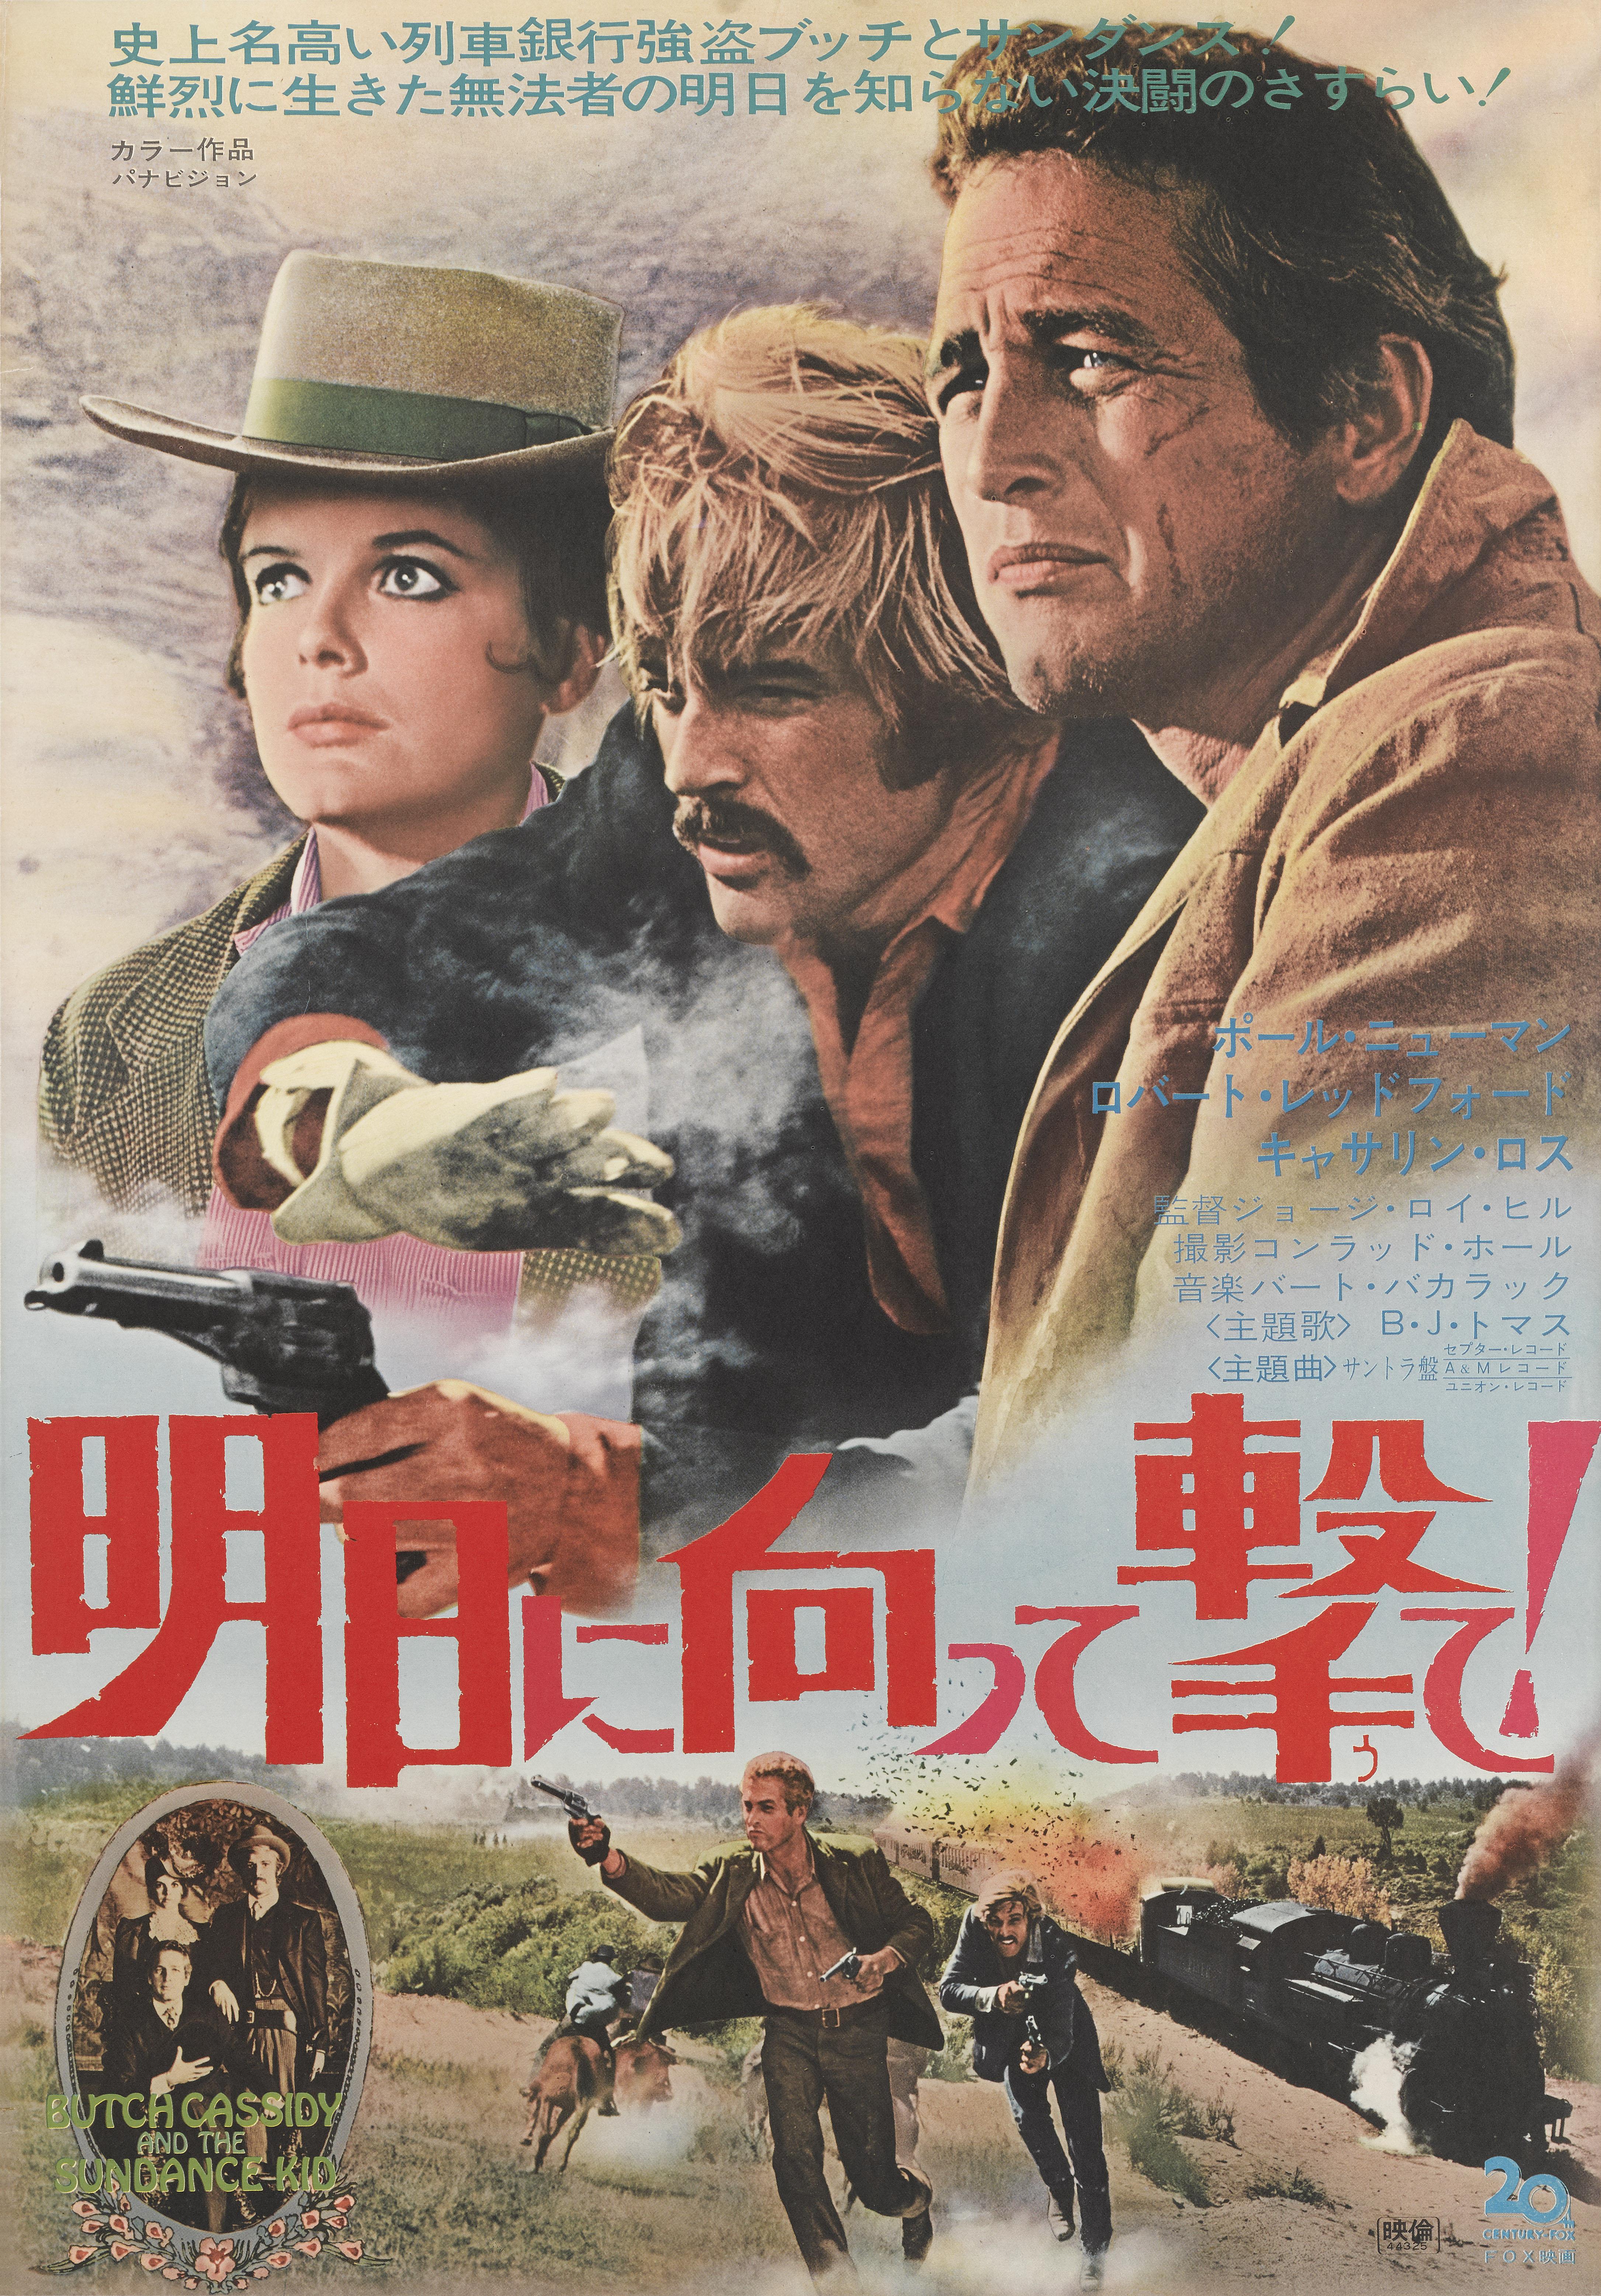 Original Japanese film poster for the 1969 classic western staring Paul Newman, Robert Redford, Katherine Ross. This film was directed by George Roy Hill. This size poster would have been used outside the cinema at the time of the films release in